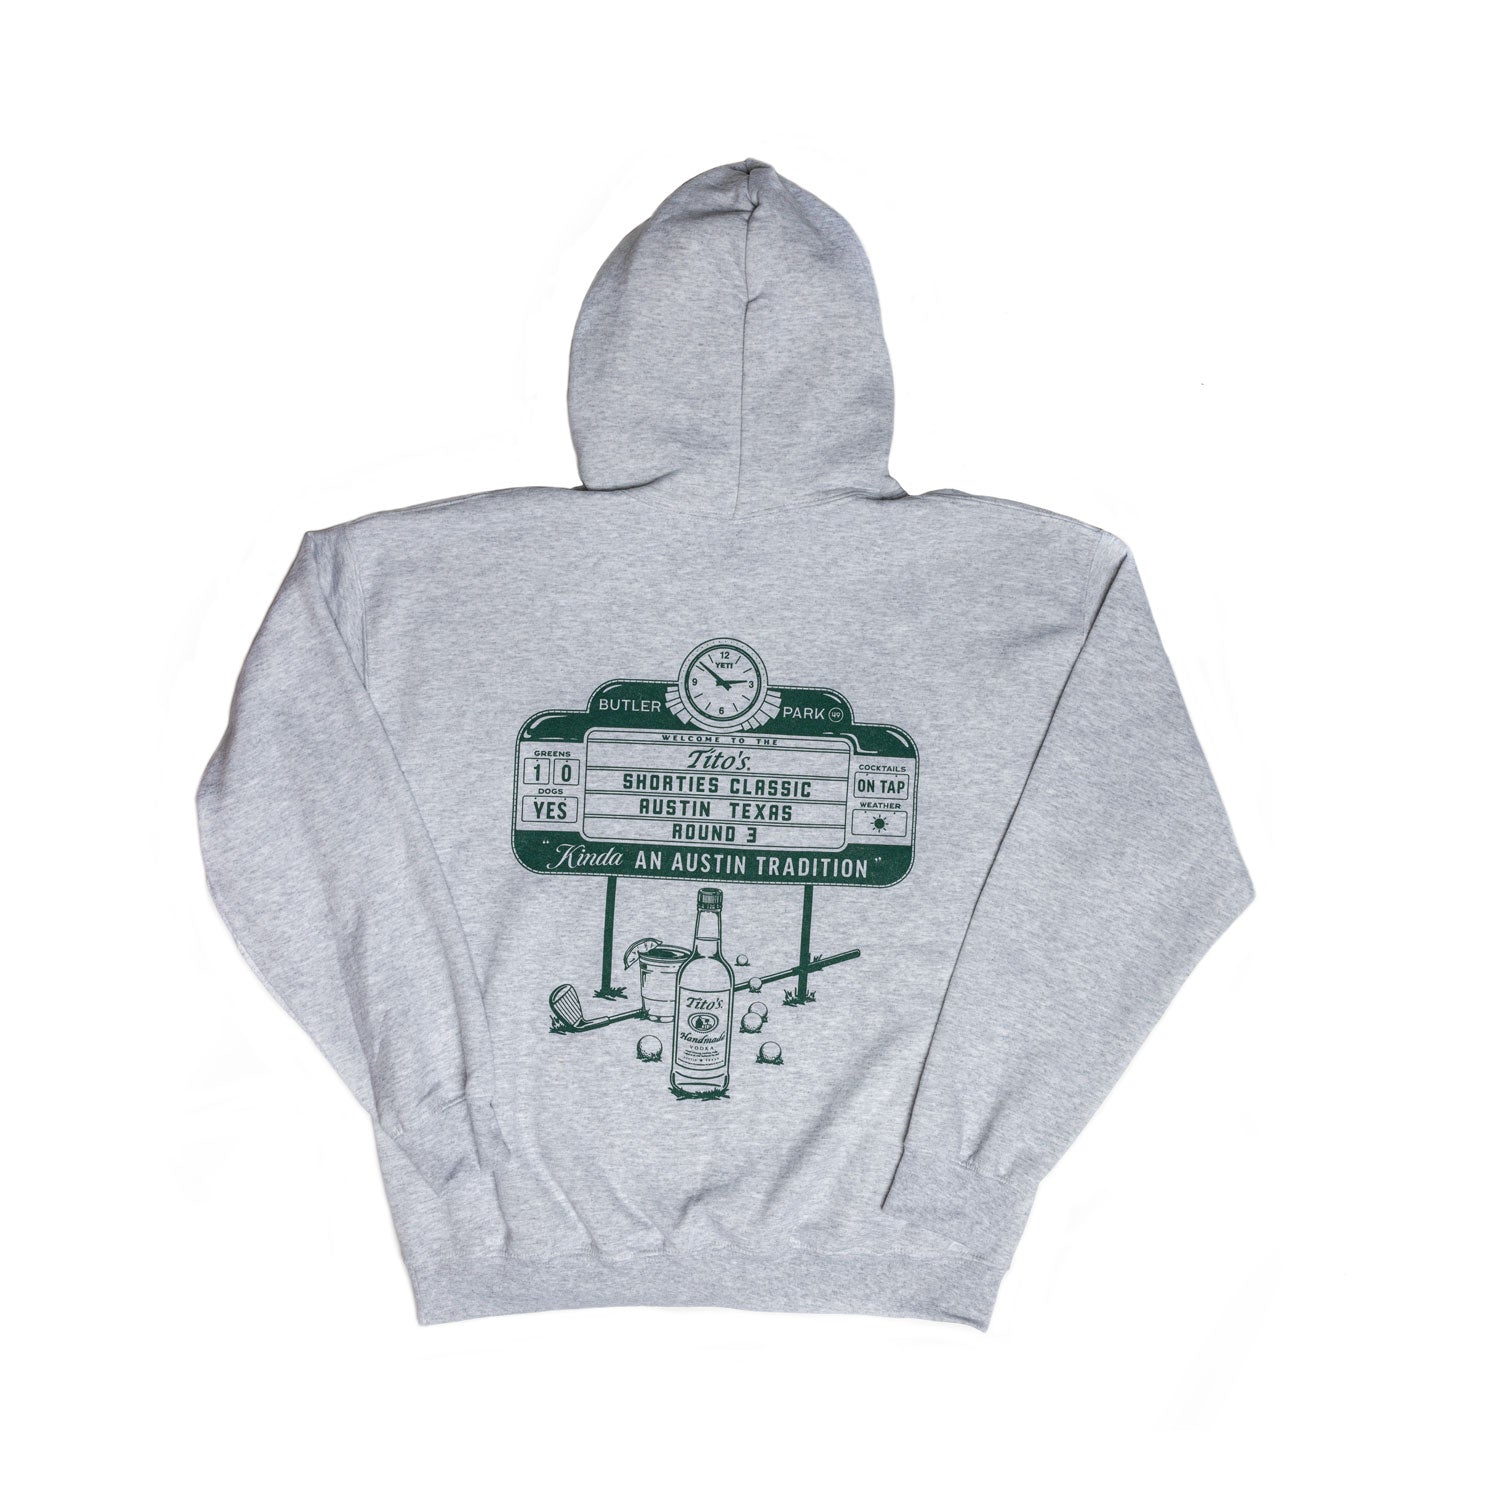 Back of gray hooded sweatshirt with scoreboard design, Tito's Handmade Vodka bottle, cocktail and golf illustrations